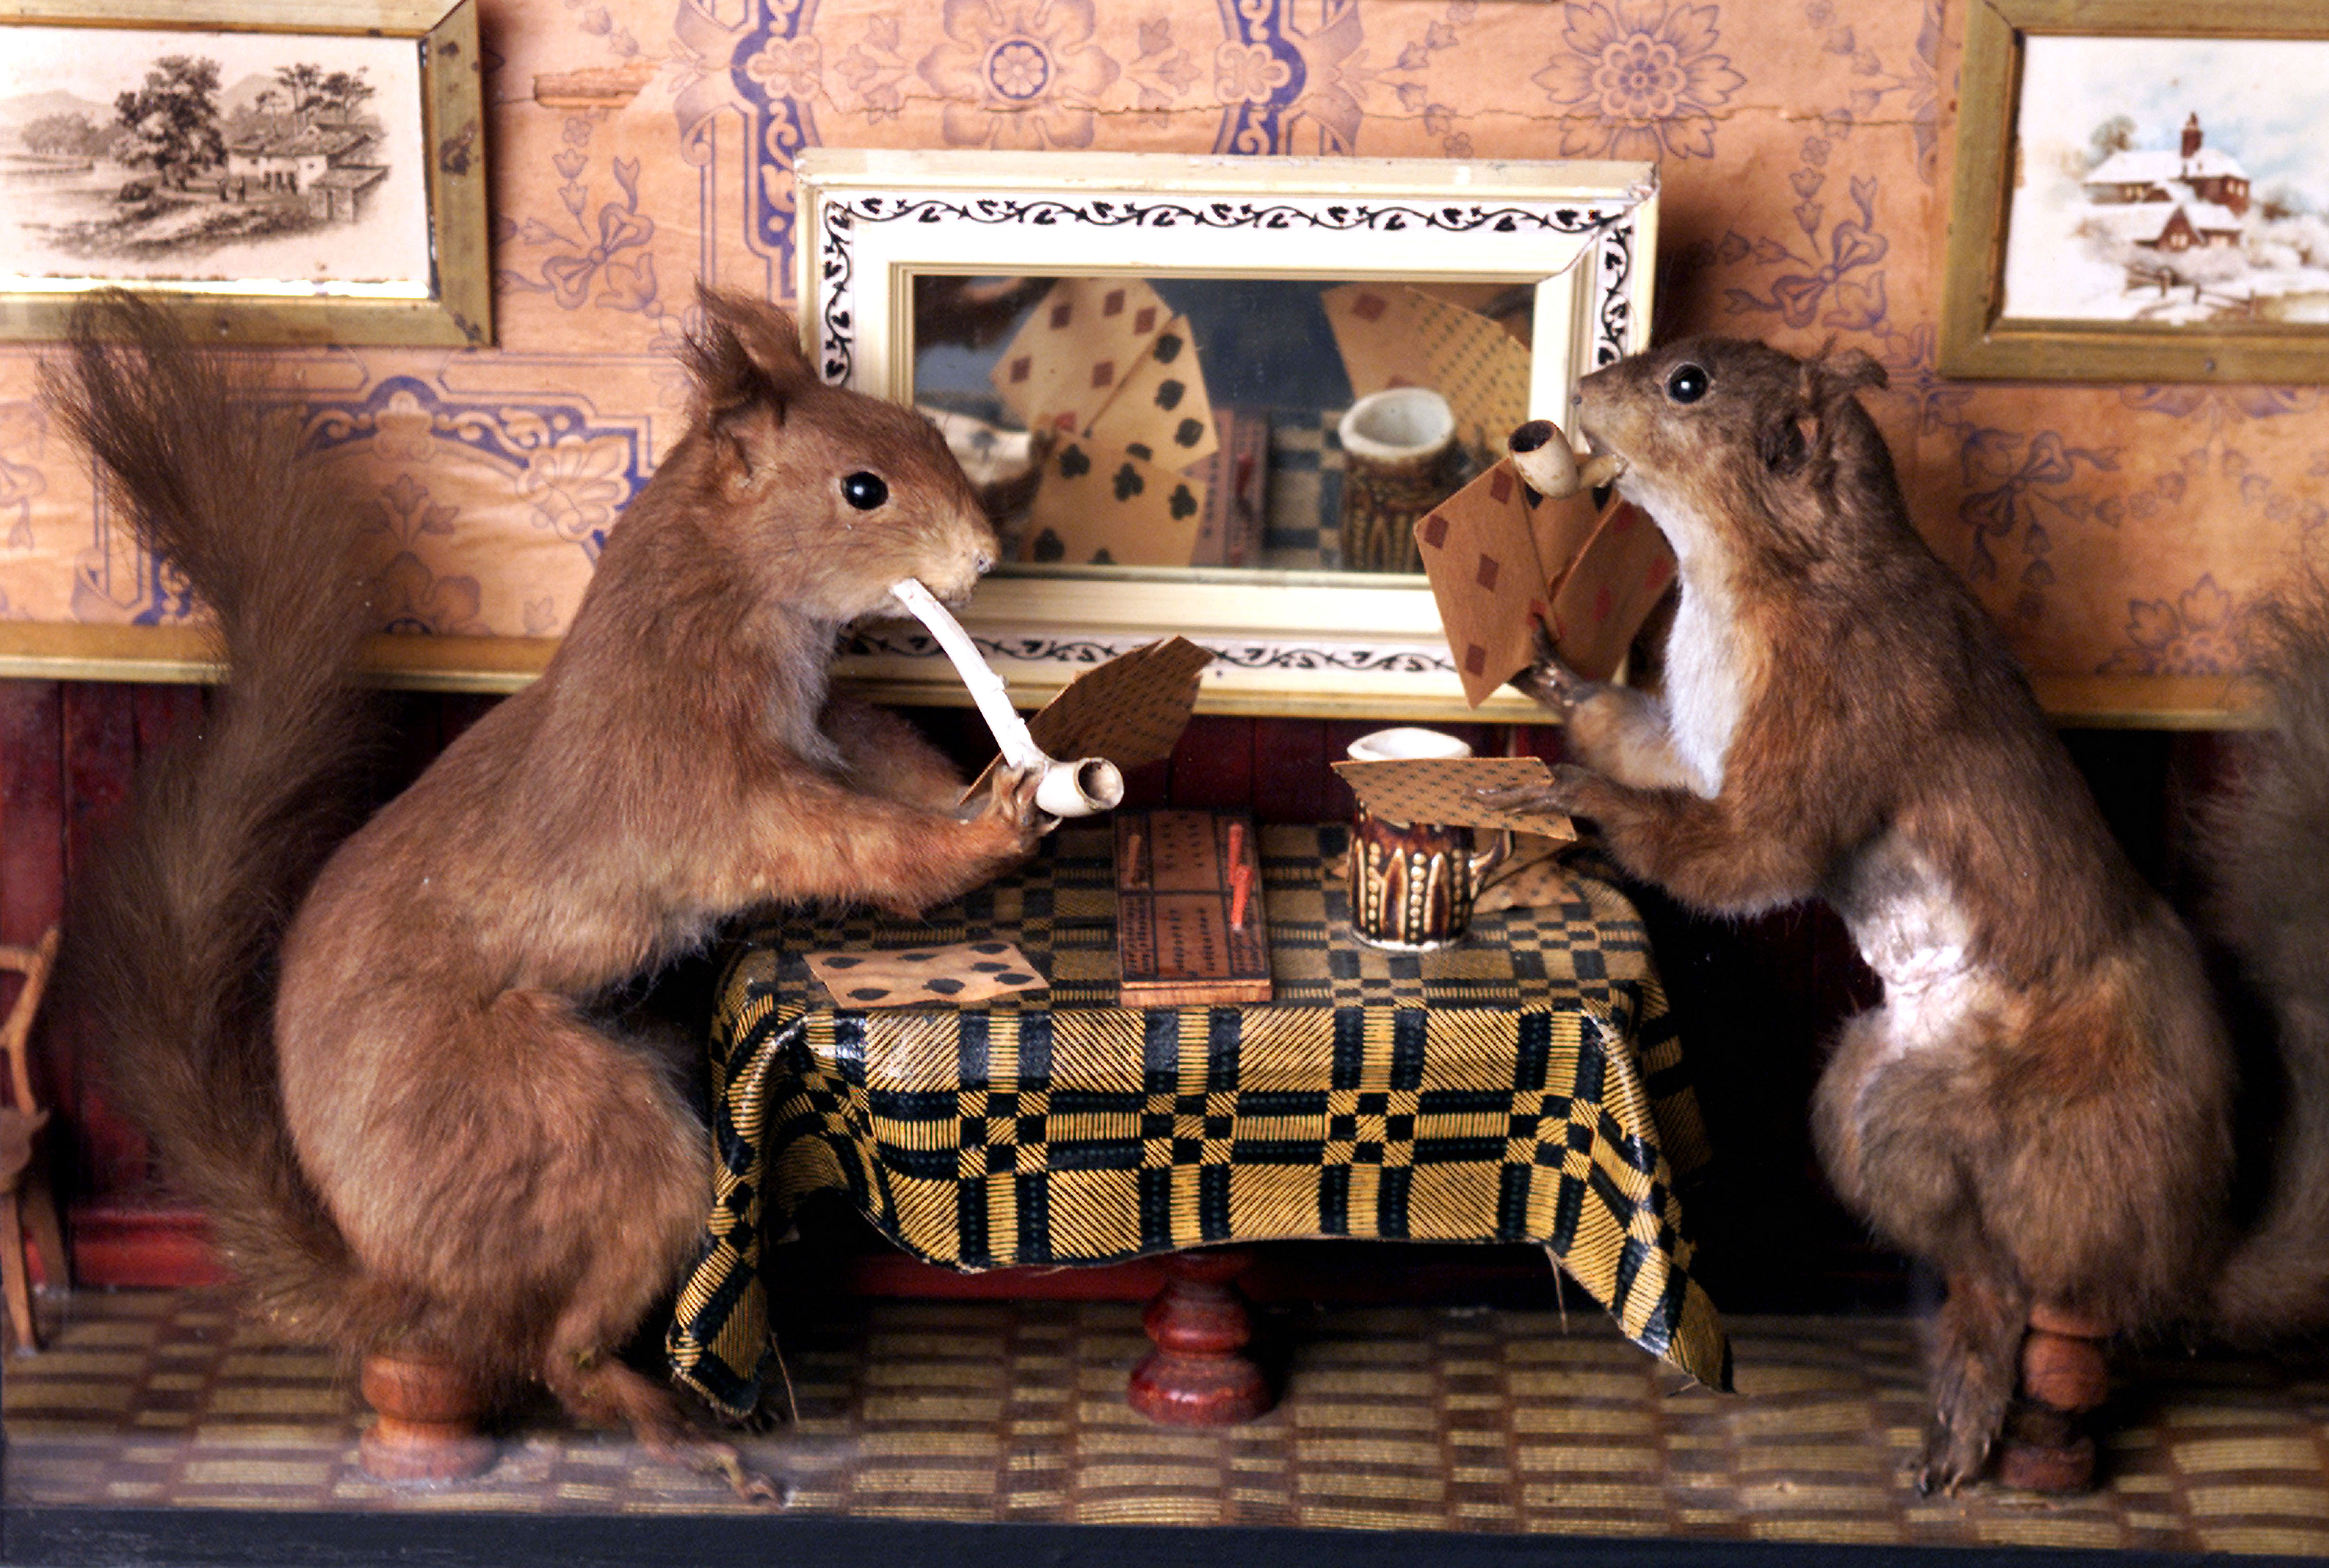 Stuffed animals from a collection made by Victorian taxidermist Walter Potter